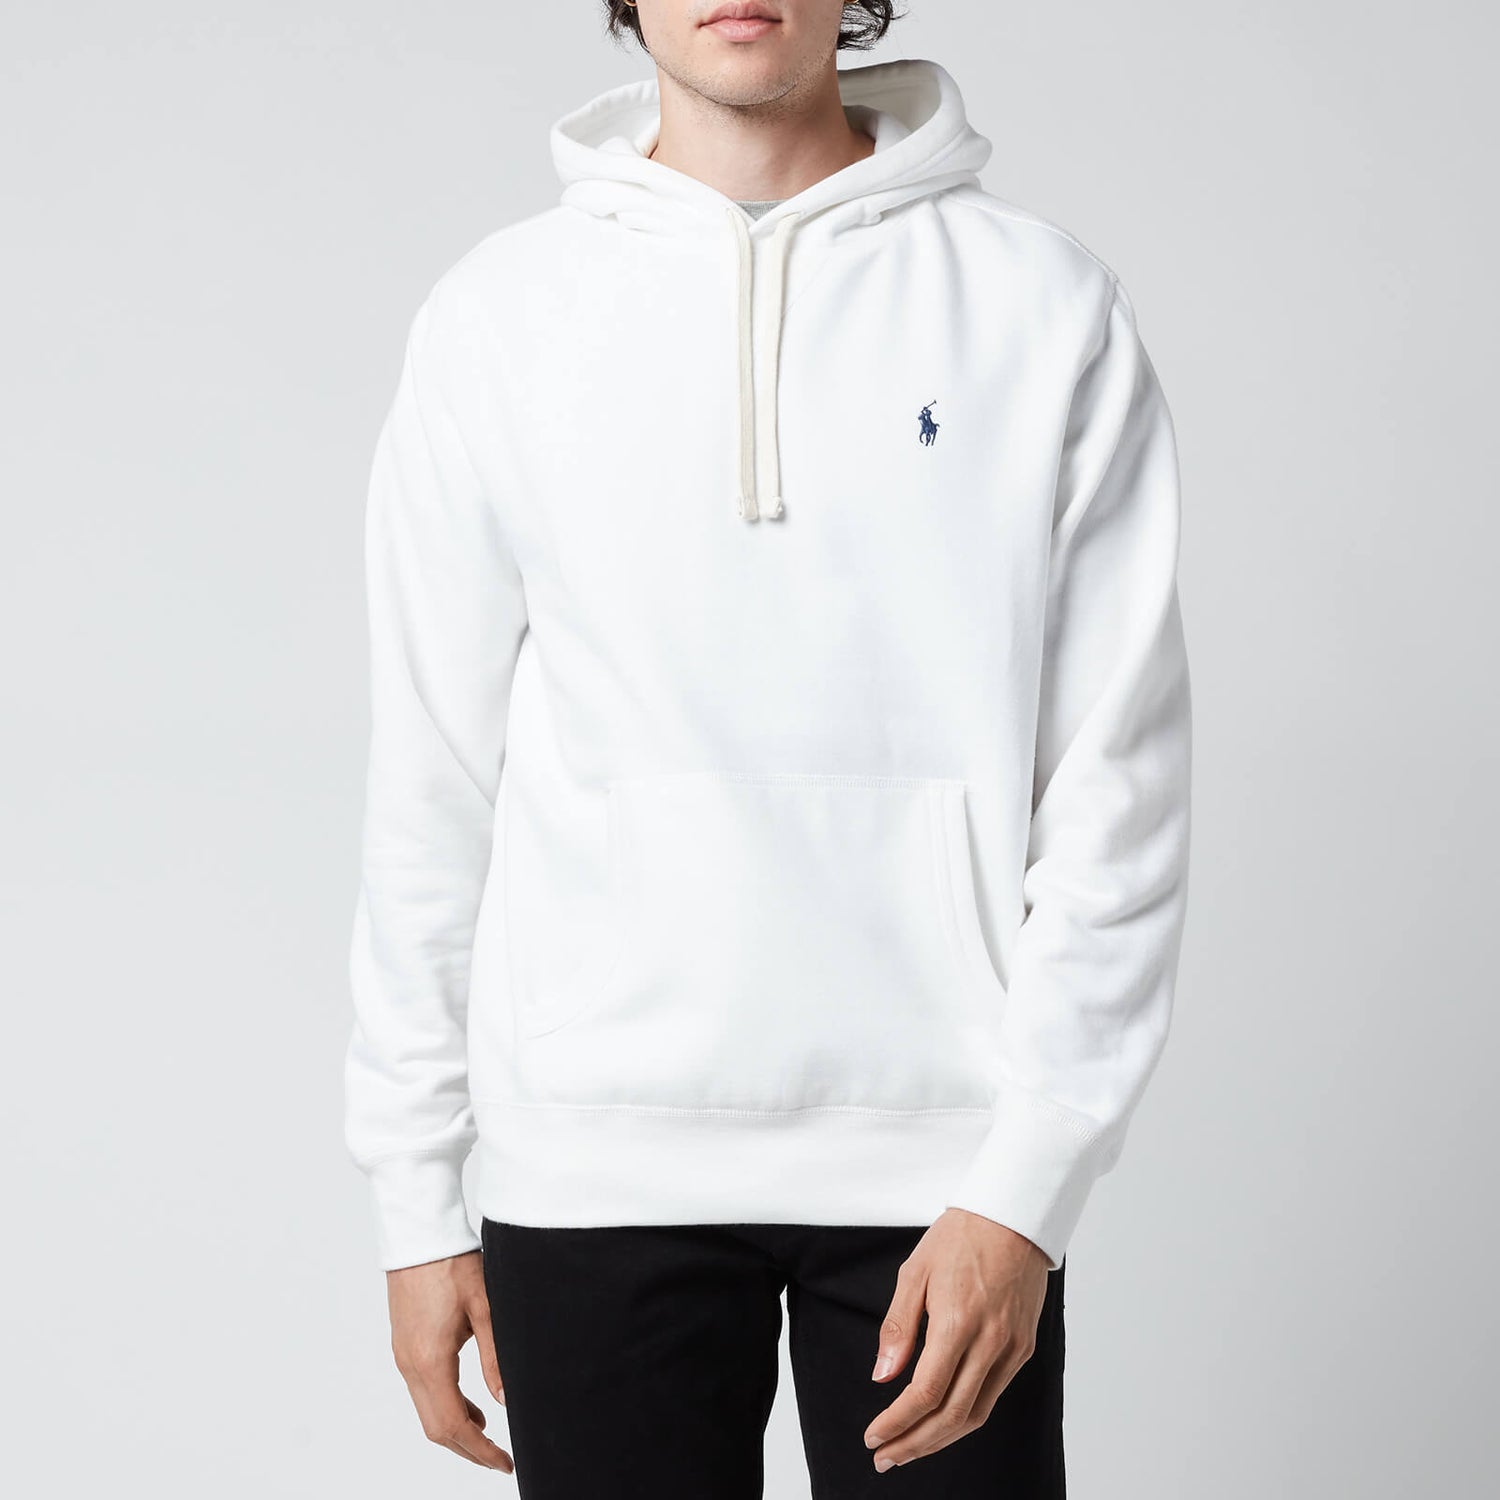 Polo Ralph Lauren Men's Fleece Hoodie - White - Free UK Delivery Available